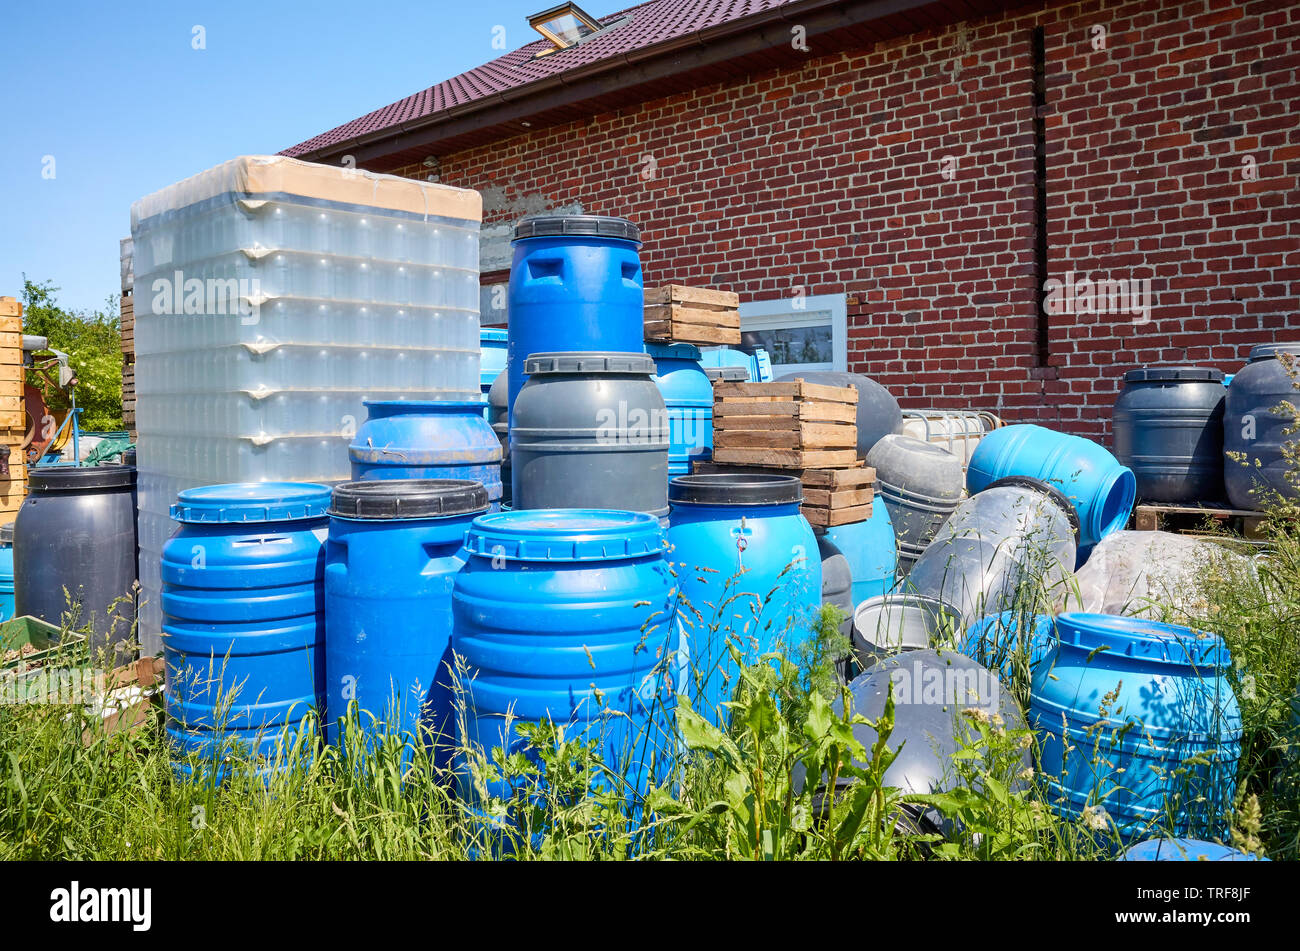 Empty plastic barrels and containers used in food processing piled at a farmyard. Stock Photo